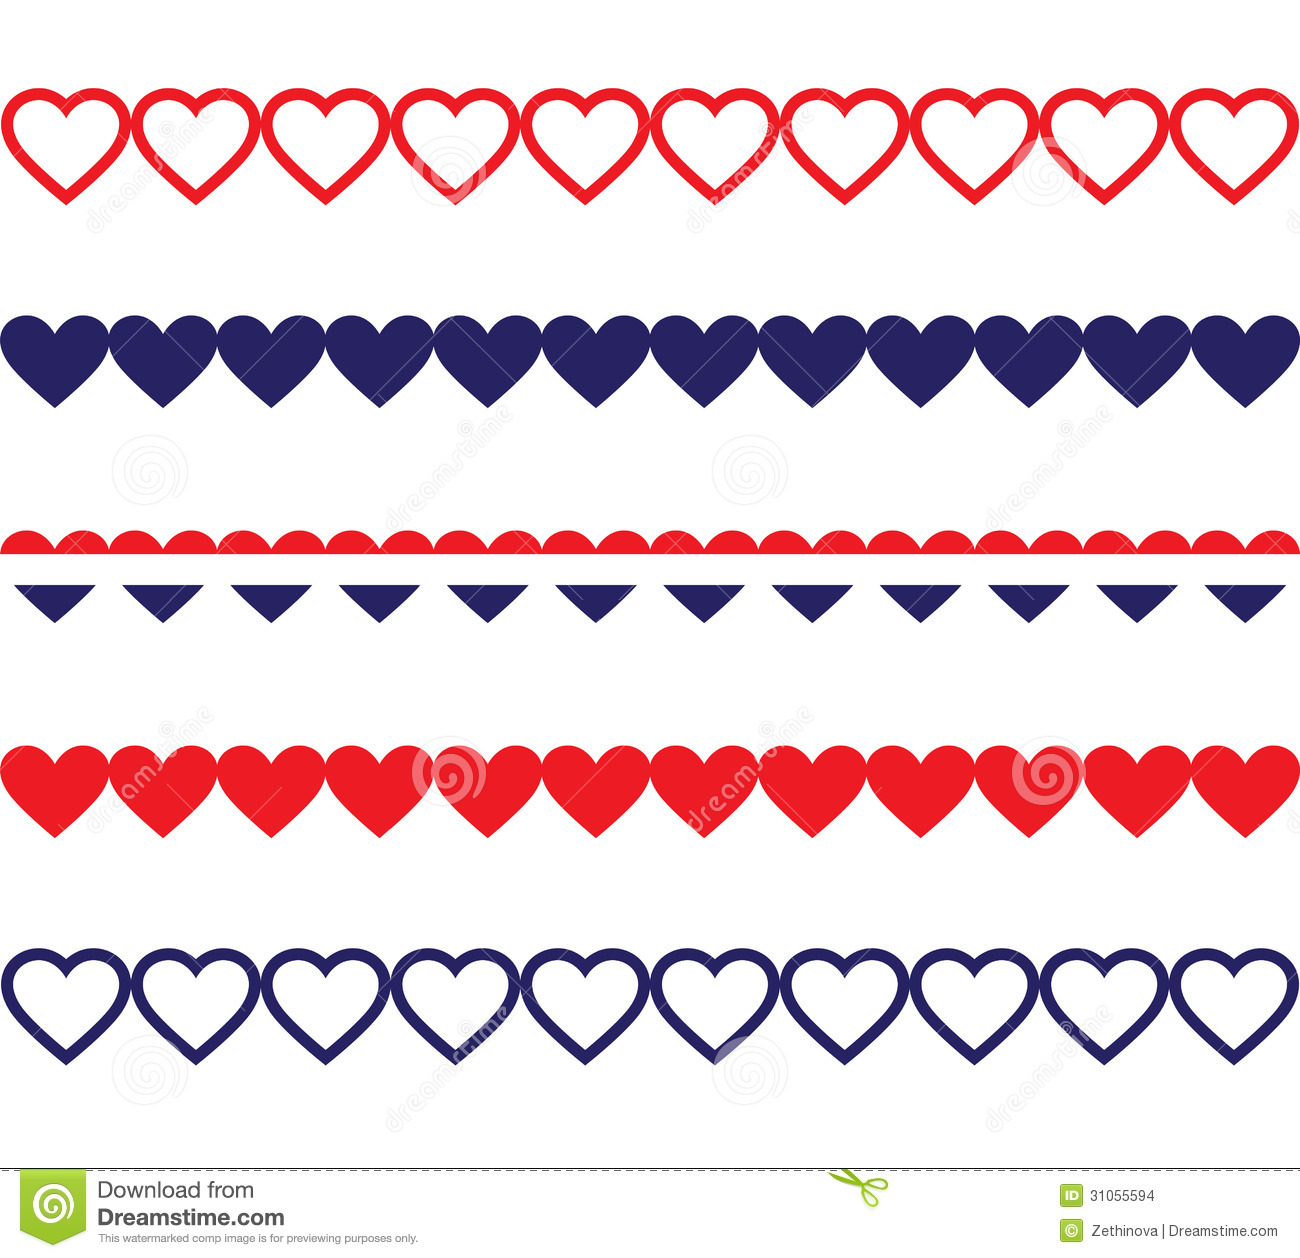 Patriotic Heart Borders Stock Images   Image  31055594